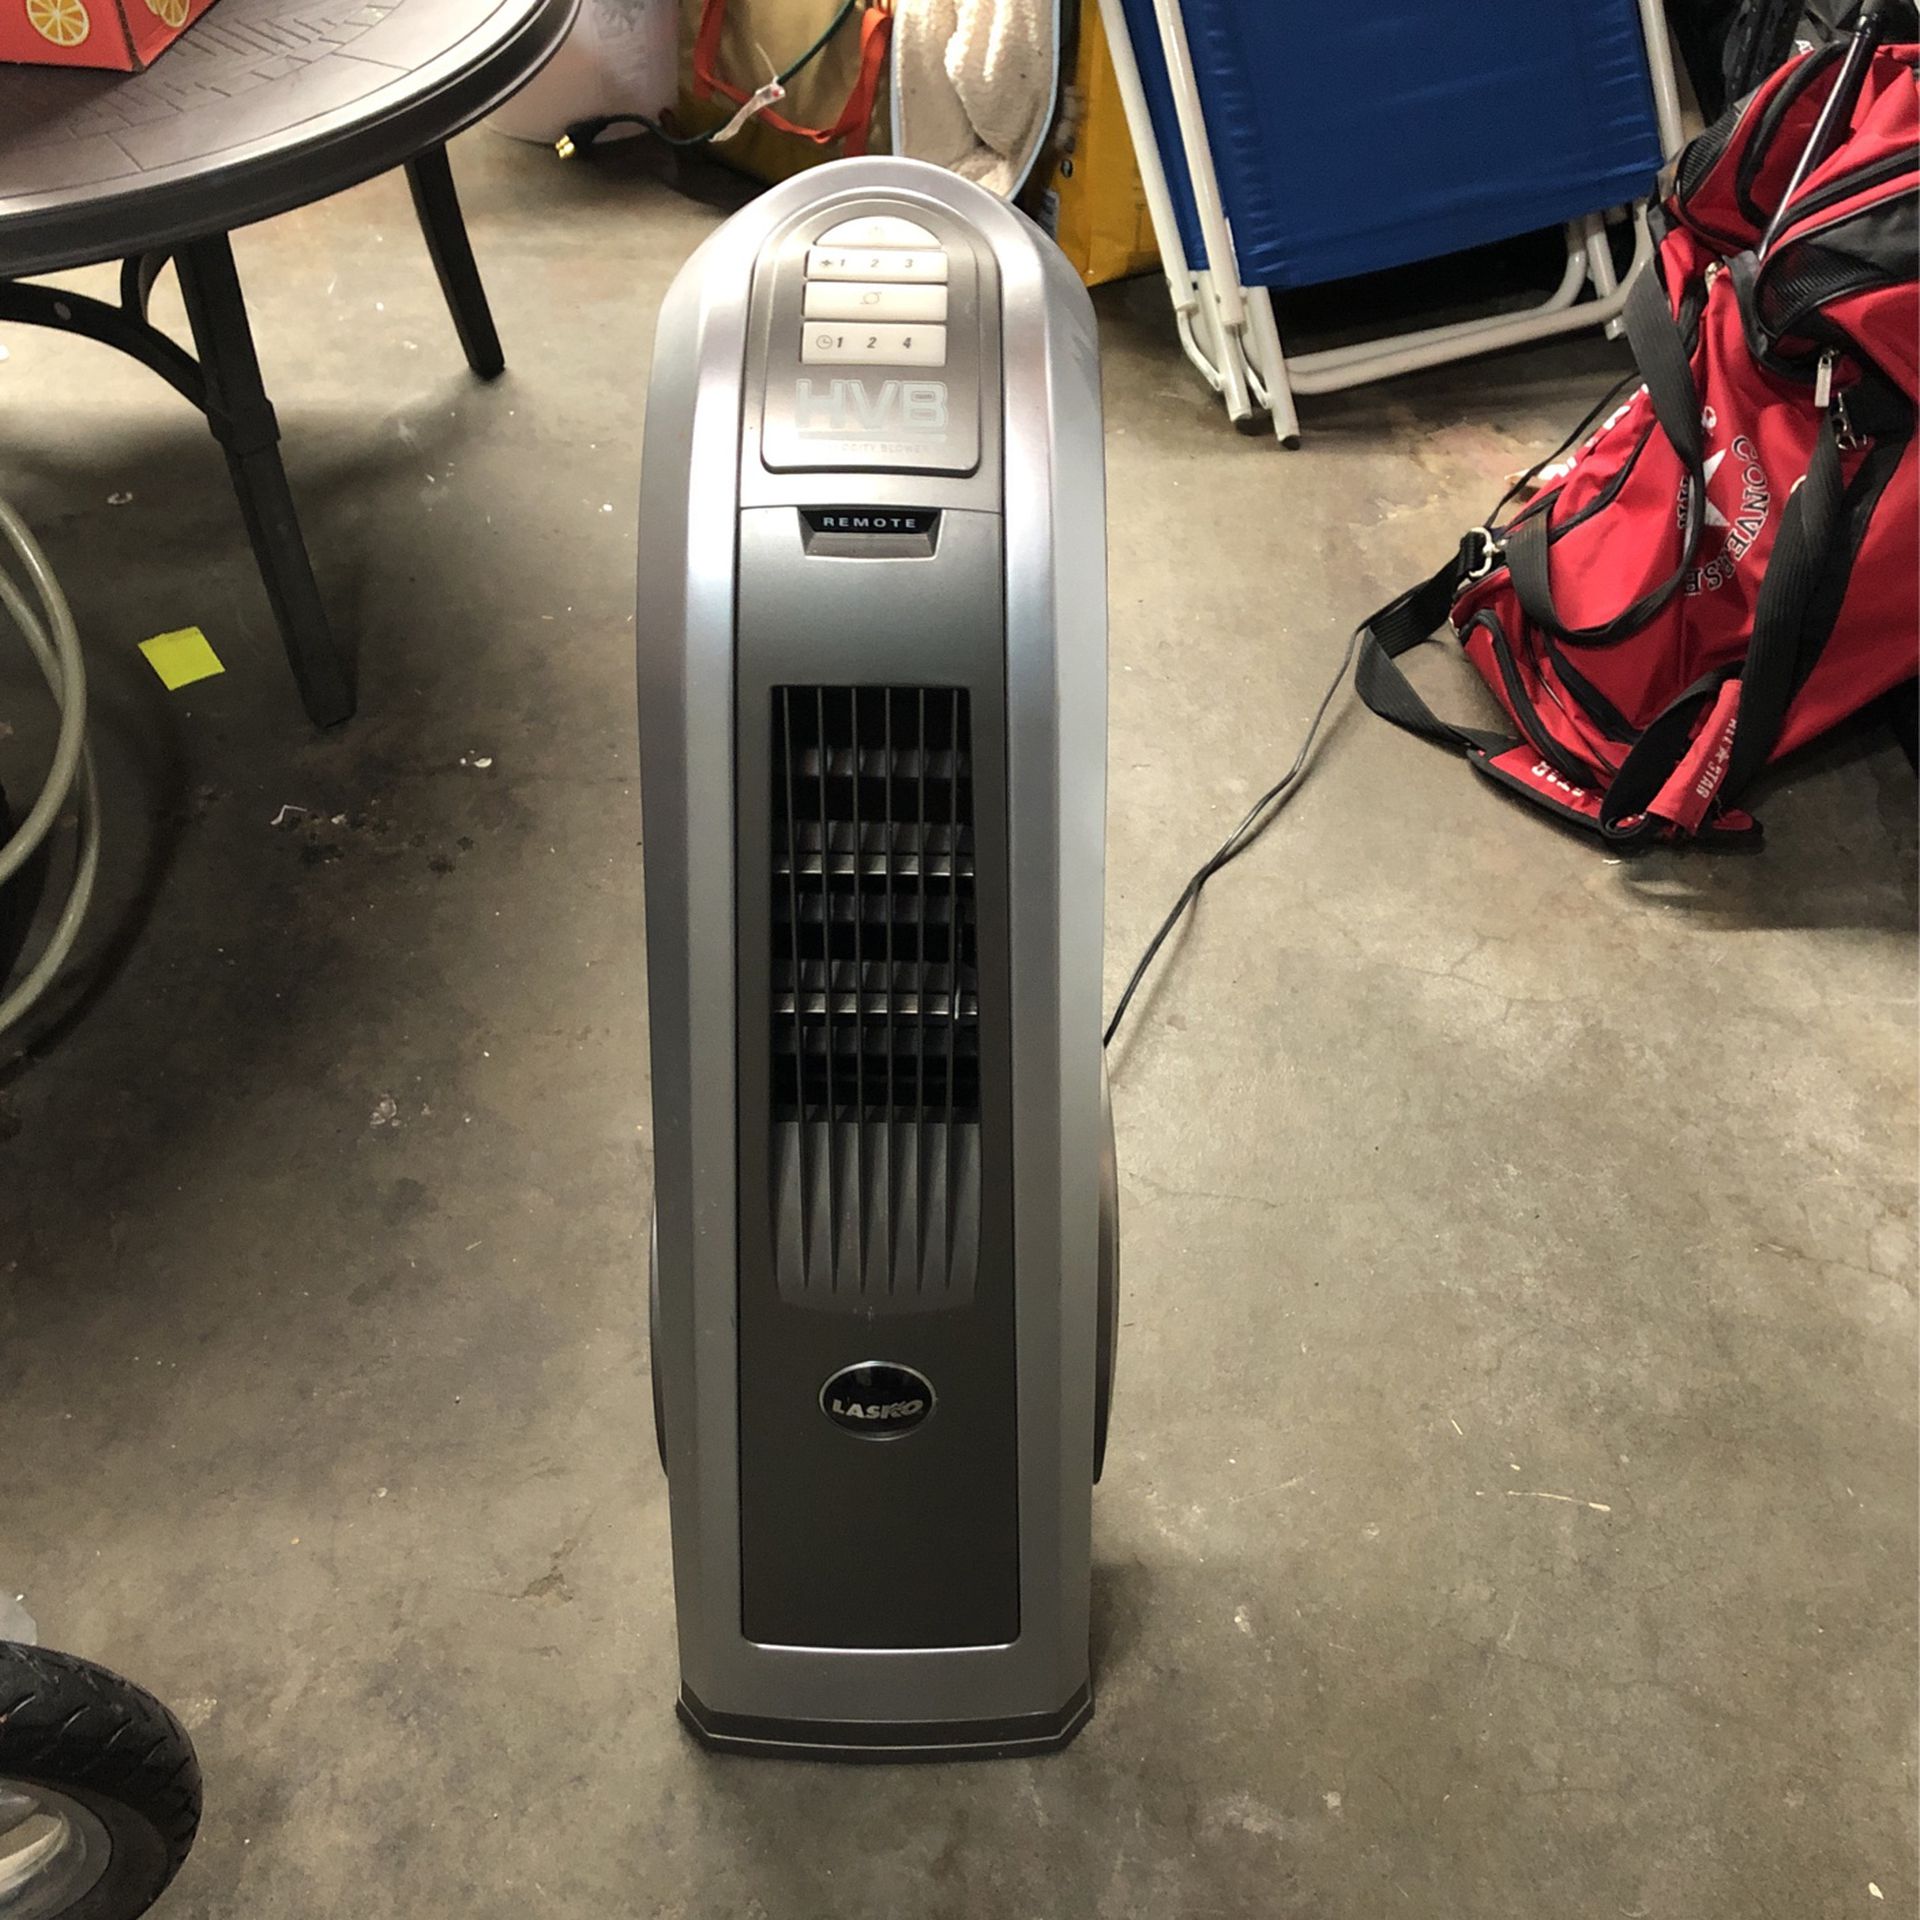 Ocillating Space Heater $10